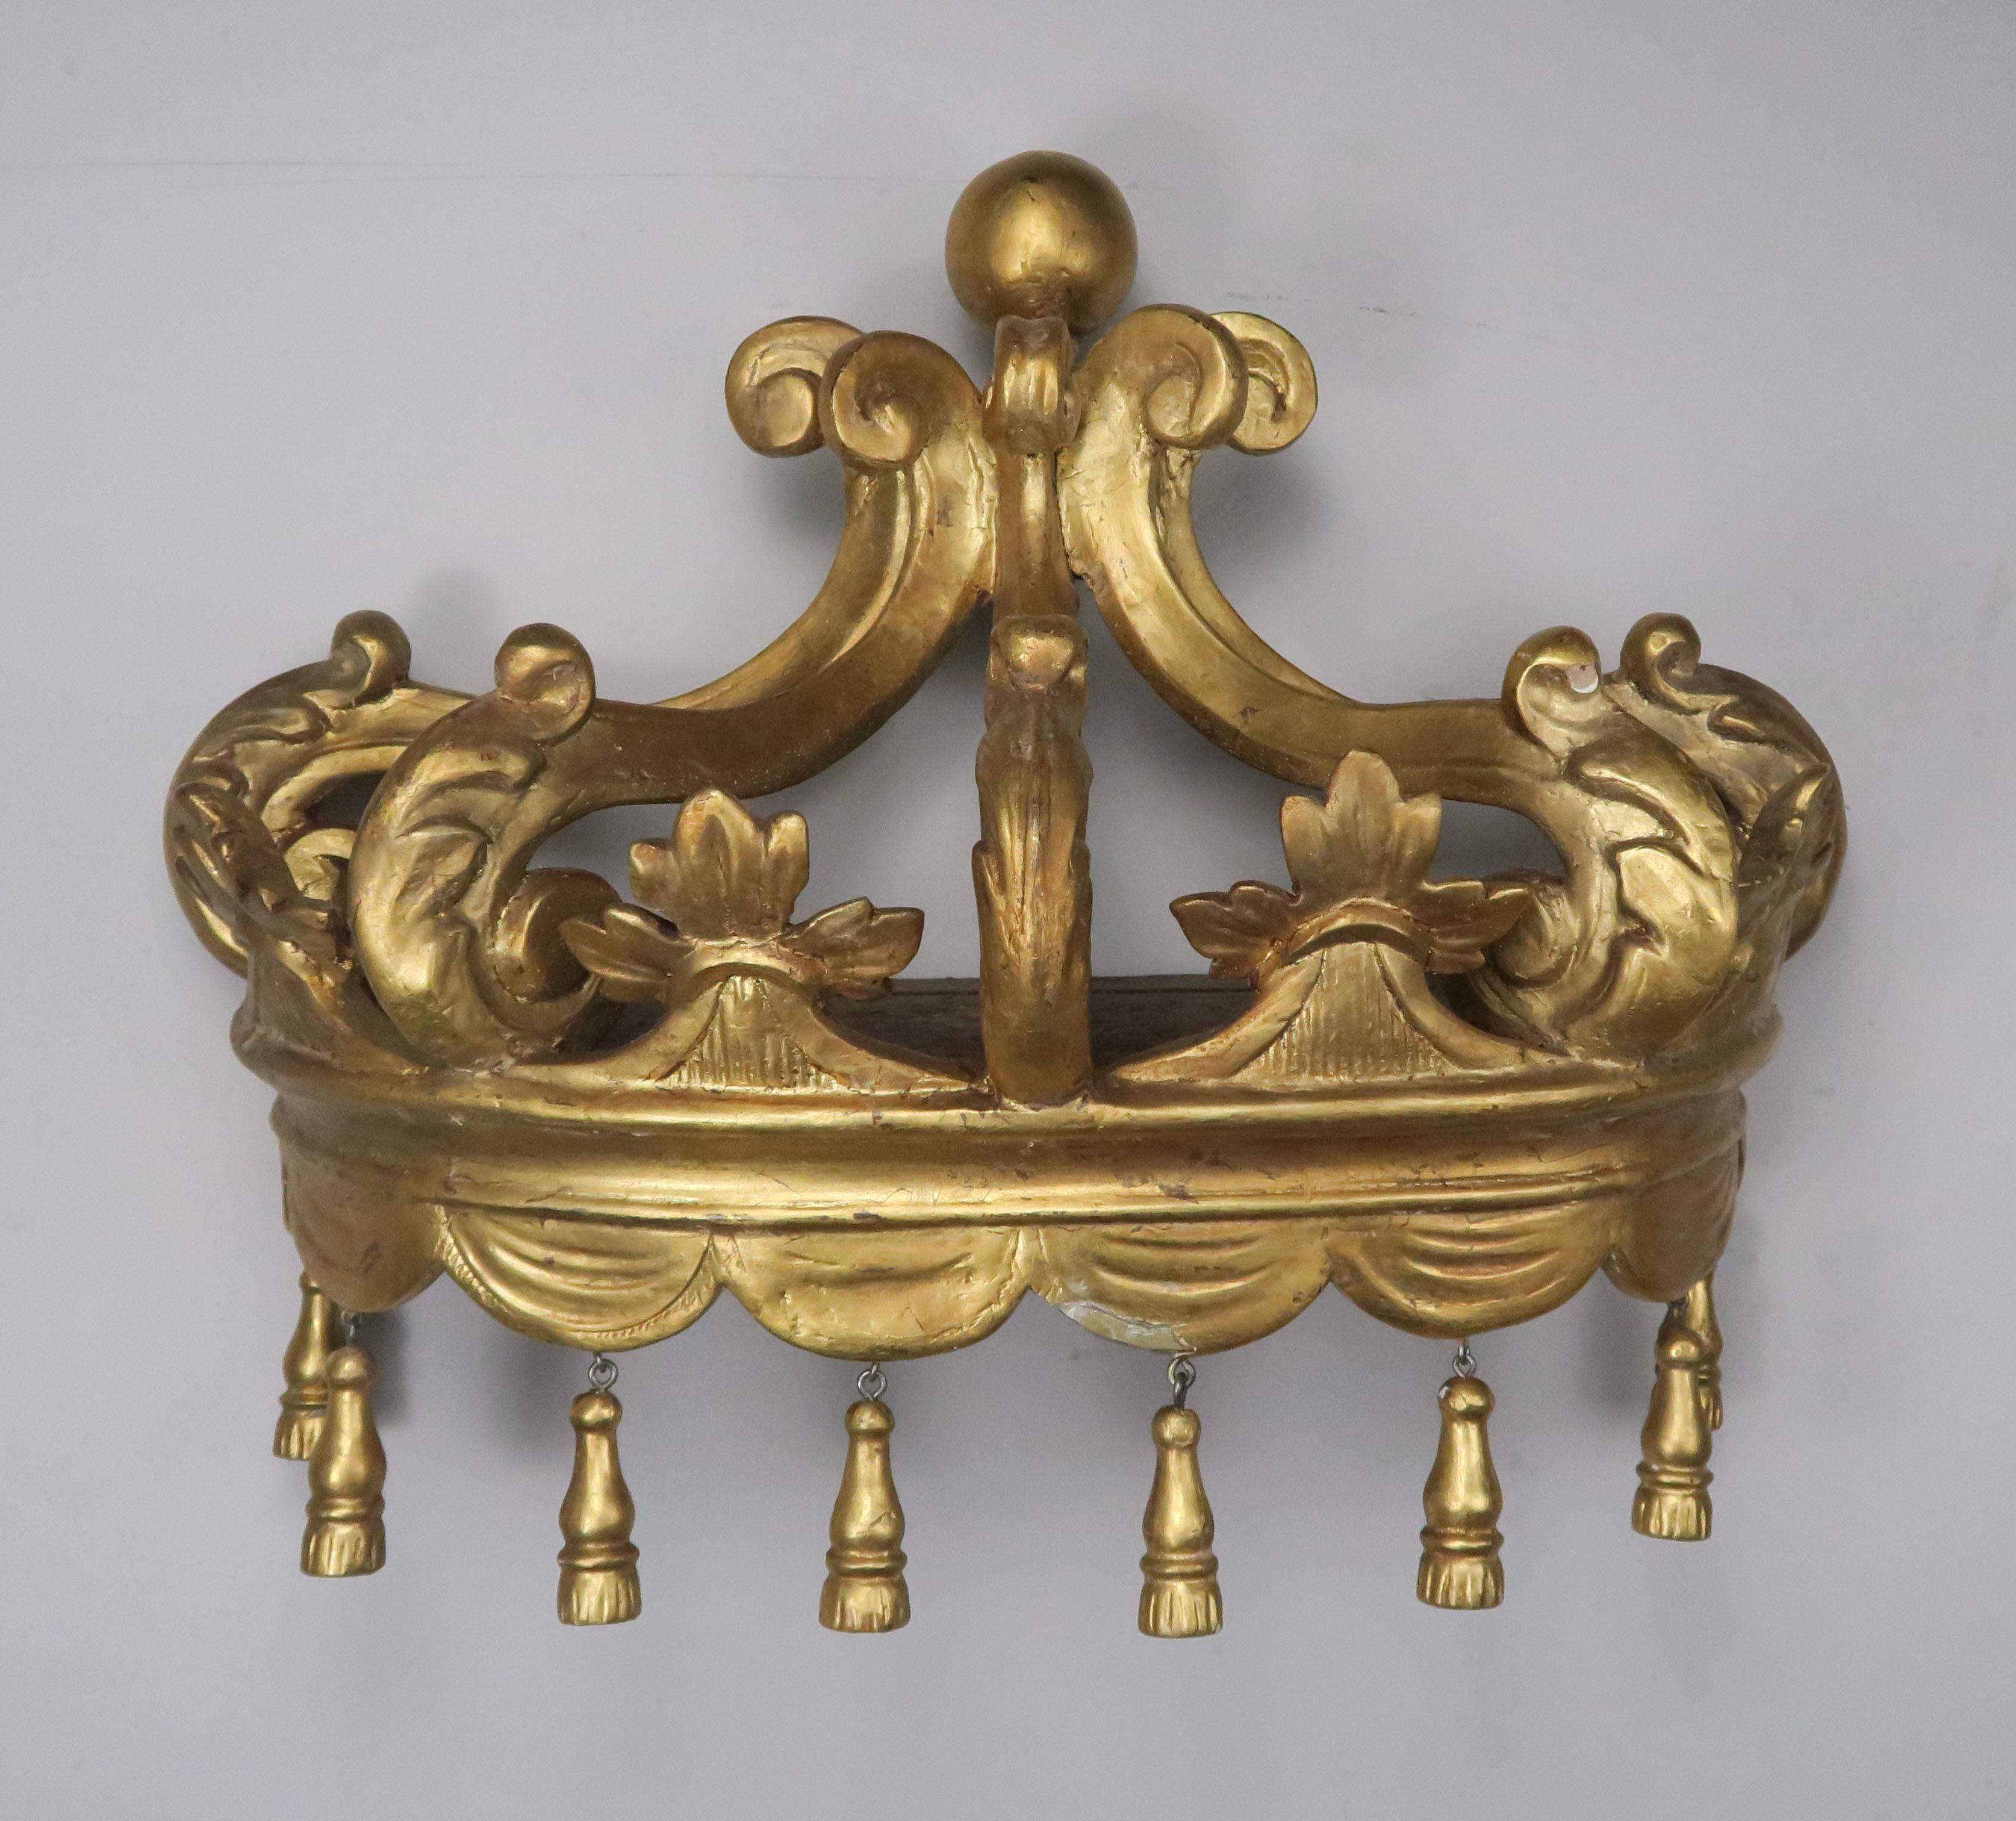 Italian gold leaf carved bed crown made with carved acanthus leaves and (8) hand-carved tassels hanging from the bottom. It can be hung over a bed or doorway to a room. You can drape fabric for a more dramatic effect.